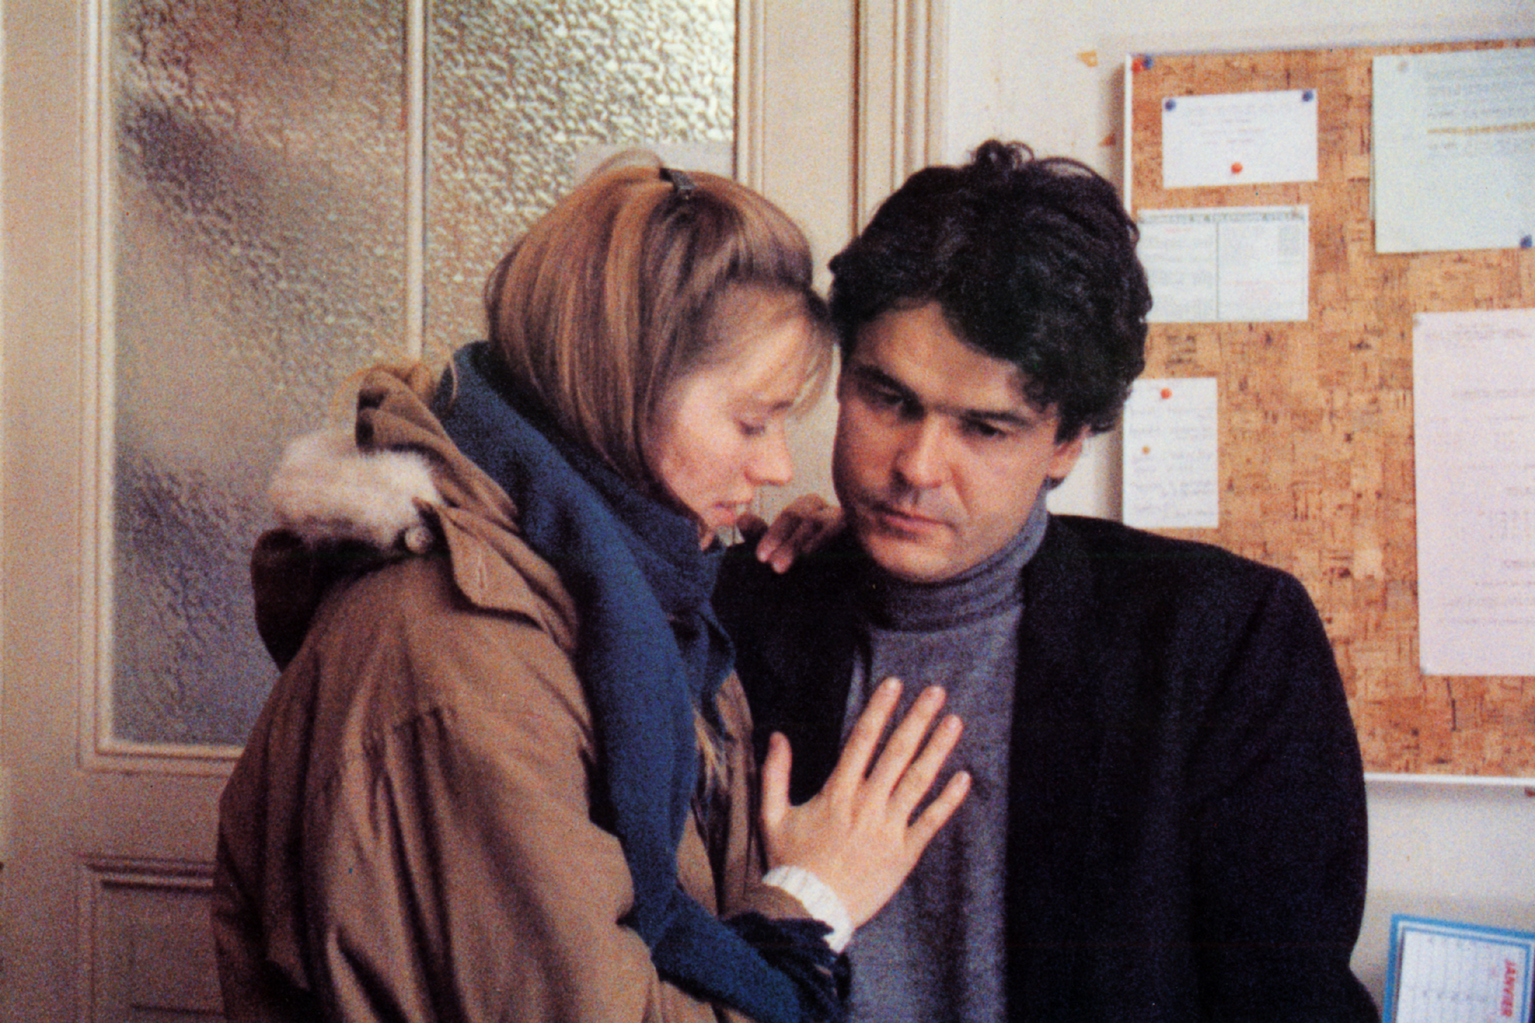 Still of Hervé Furic and Charlotte Véry in Conte d'hiver (1992)